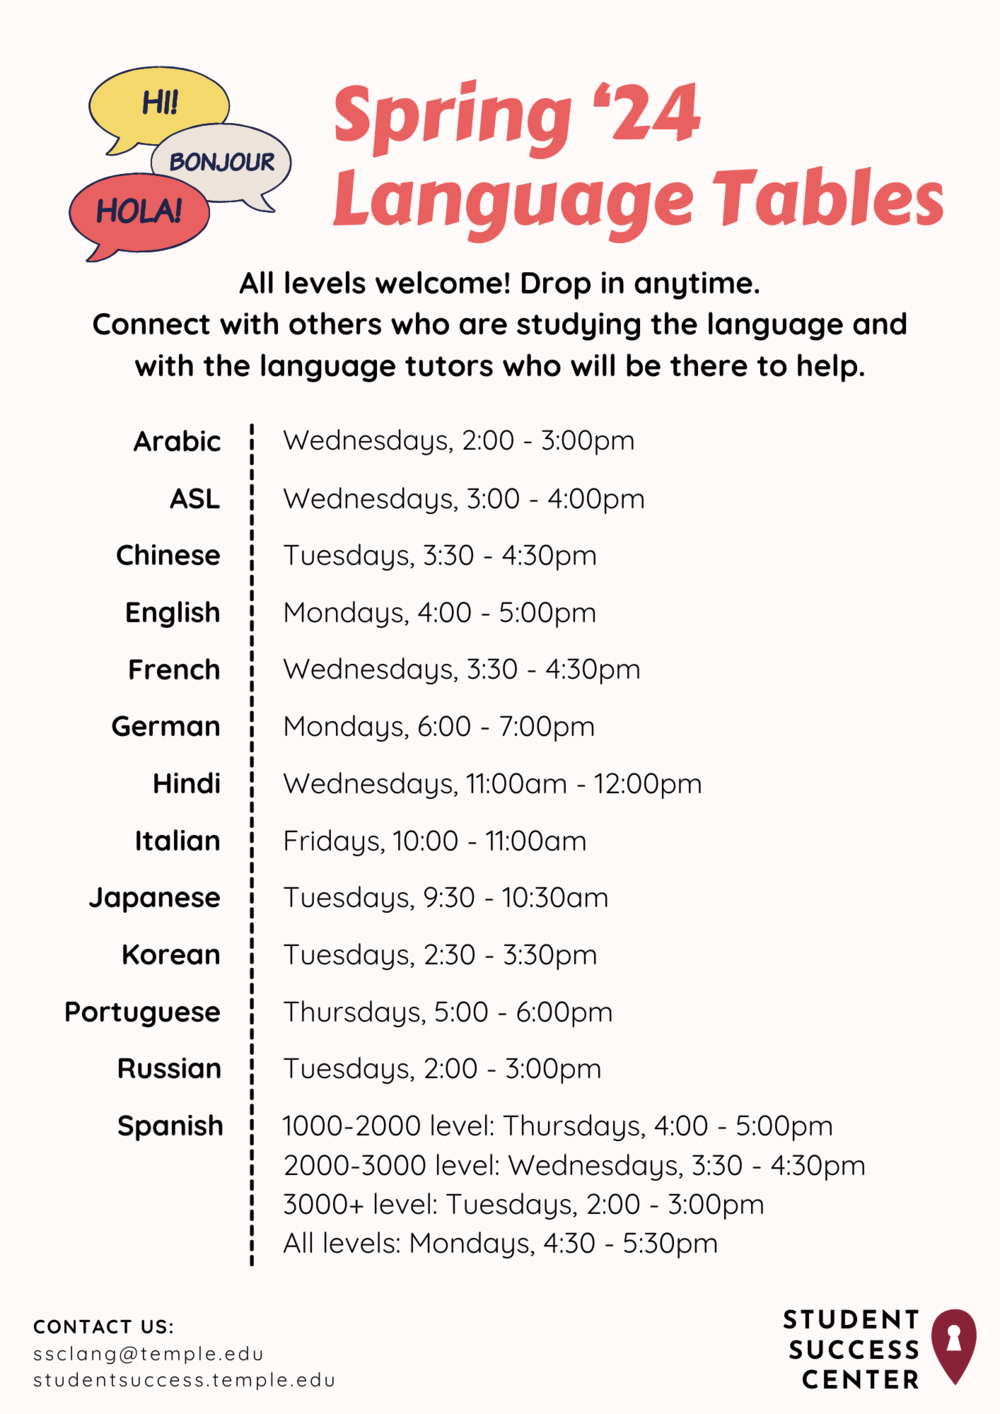 Flyer for spring 2024 language tables shows the list of tables and days and times (also in table below).